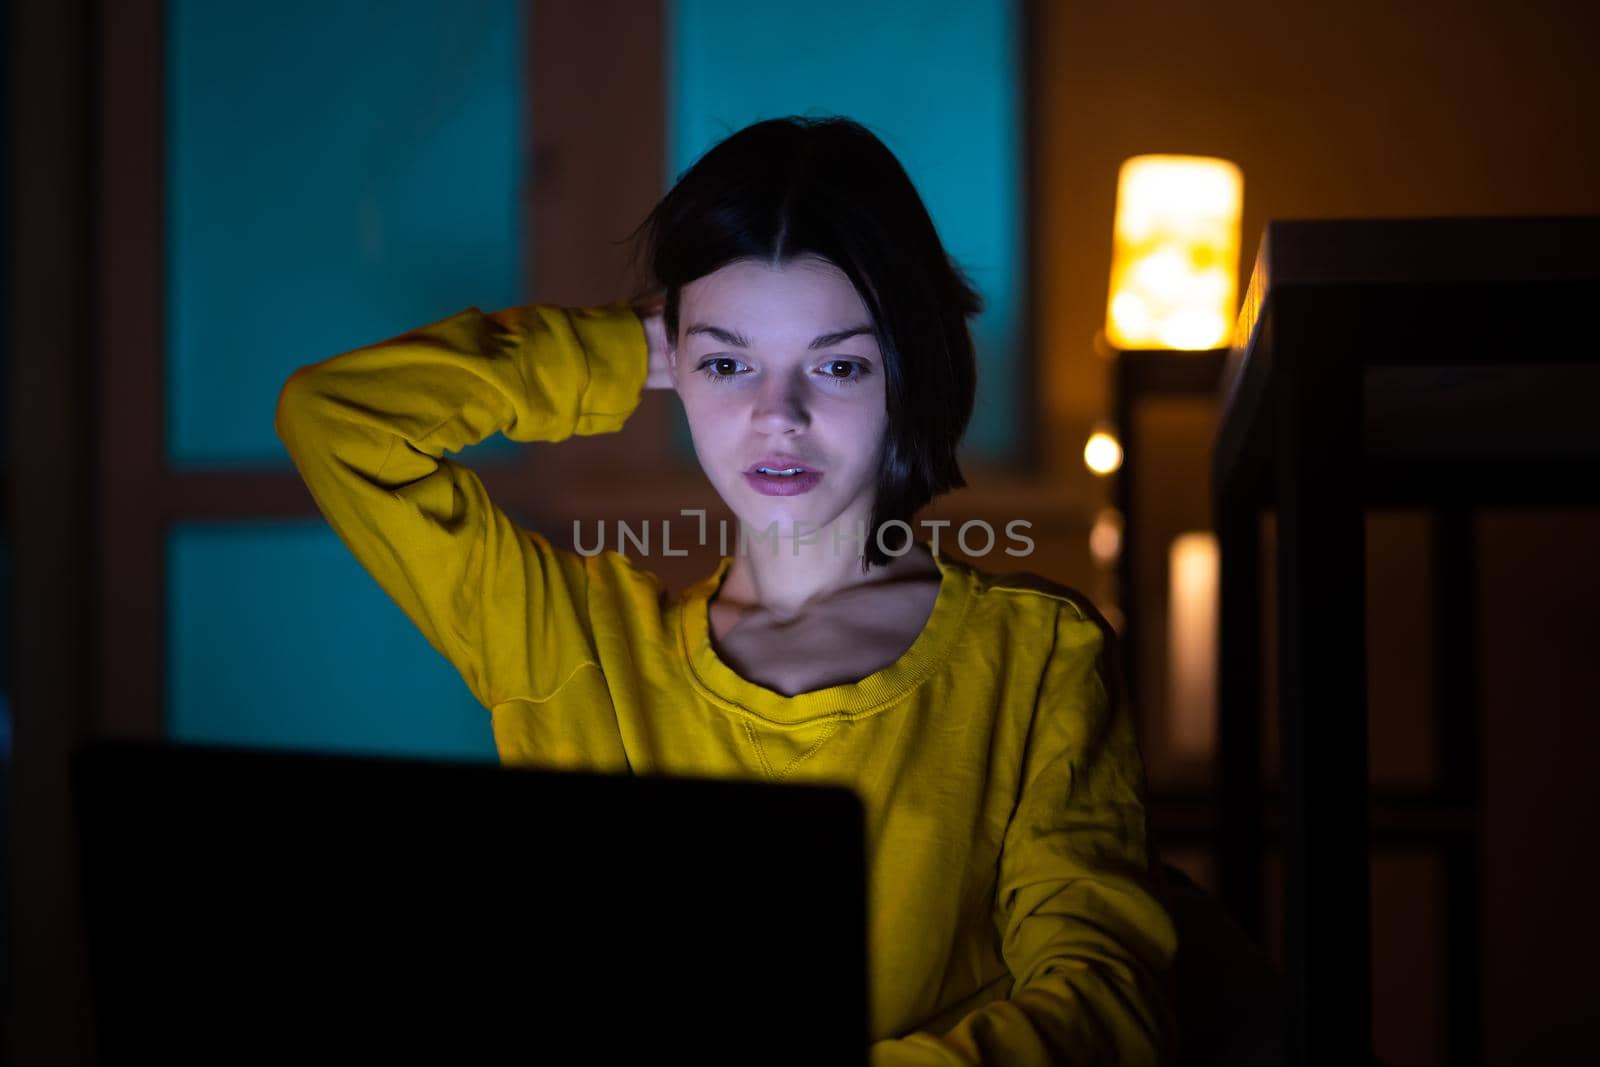 Portrait of beautiful caucasian girl uses laptop while sitting at home. In the evening creative woman works on a computer in her cozy living room.